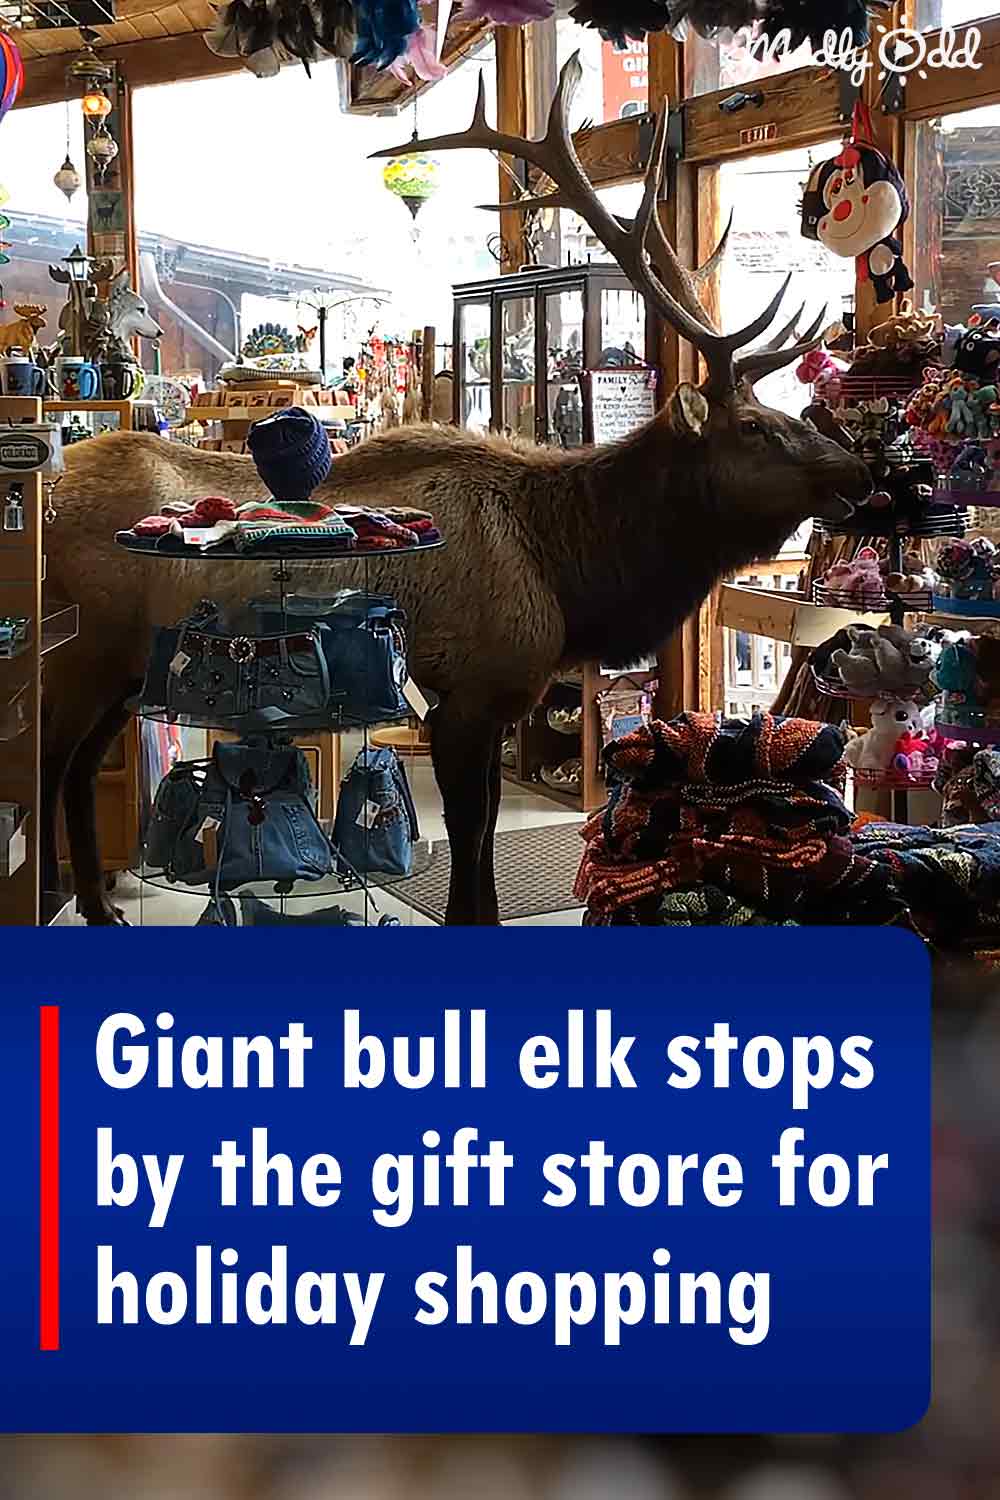 Giant bull elk stops by the gift store for holiday shopping